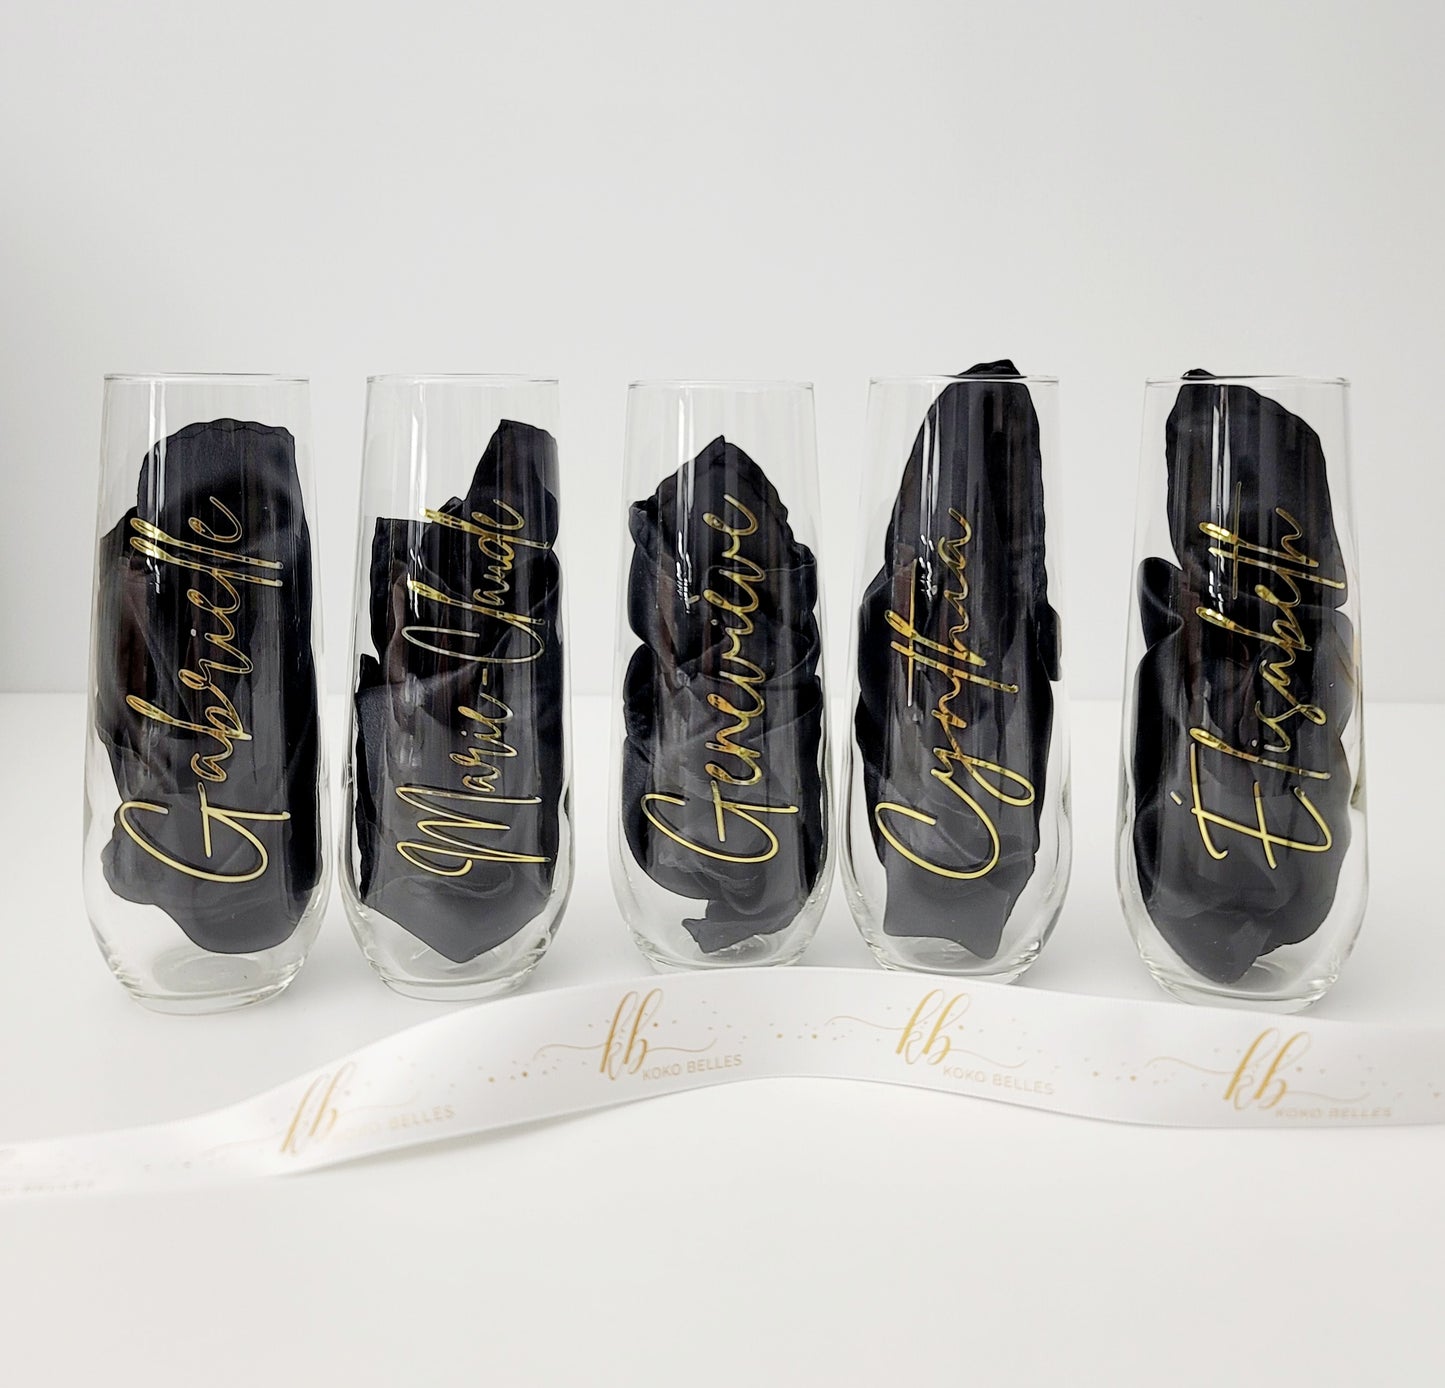 Personalized Champagne Flute (Vinyl Decal)